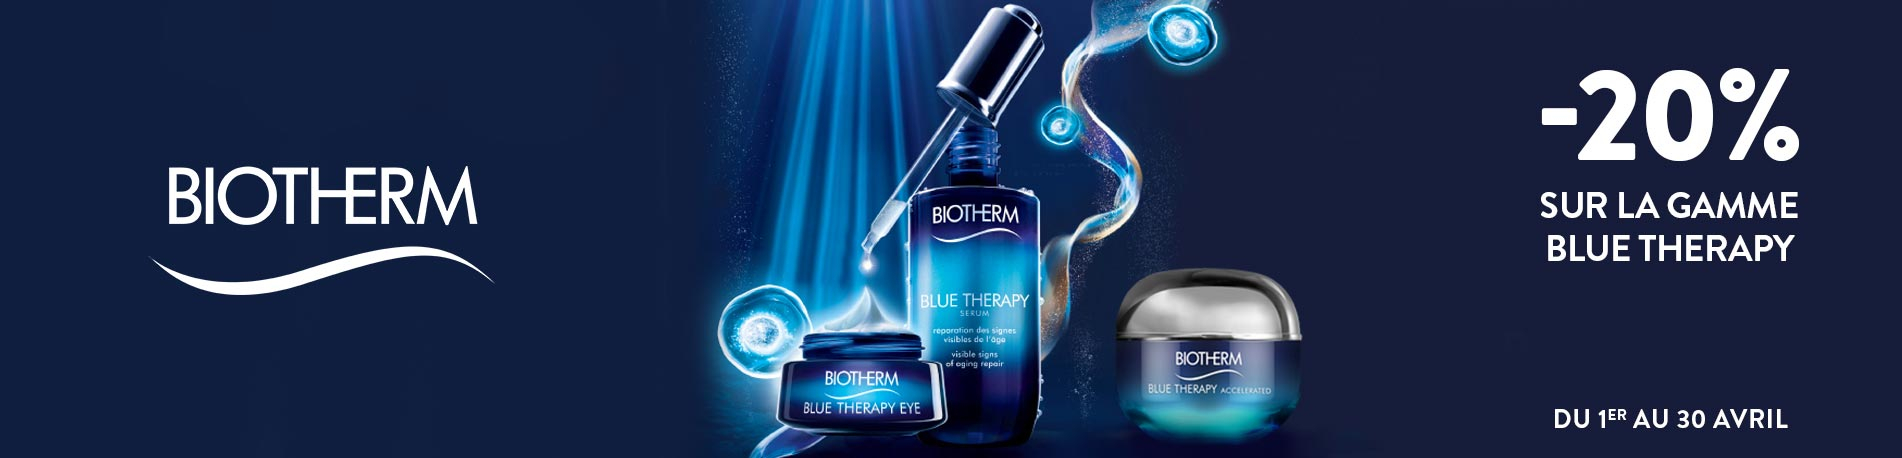 Promotion biotherm Blue Therapy